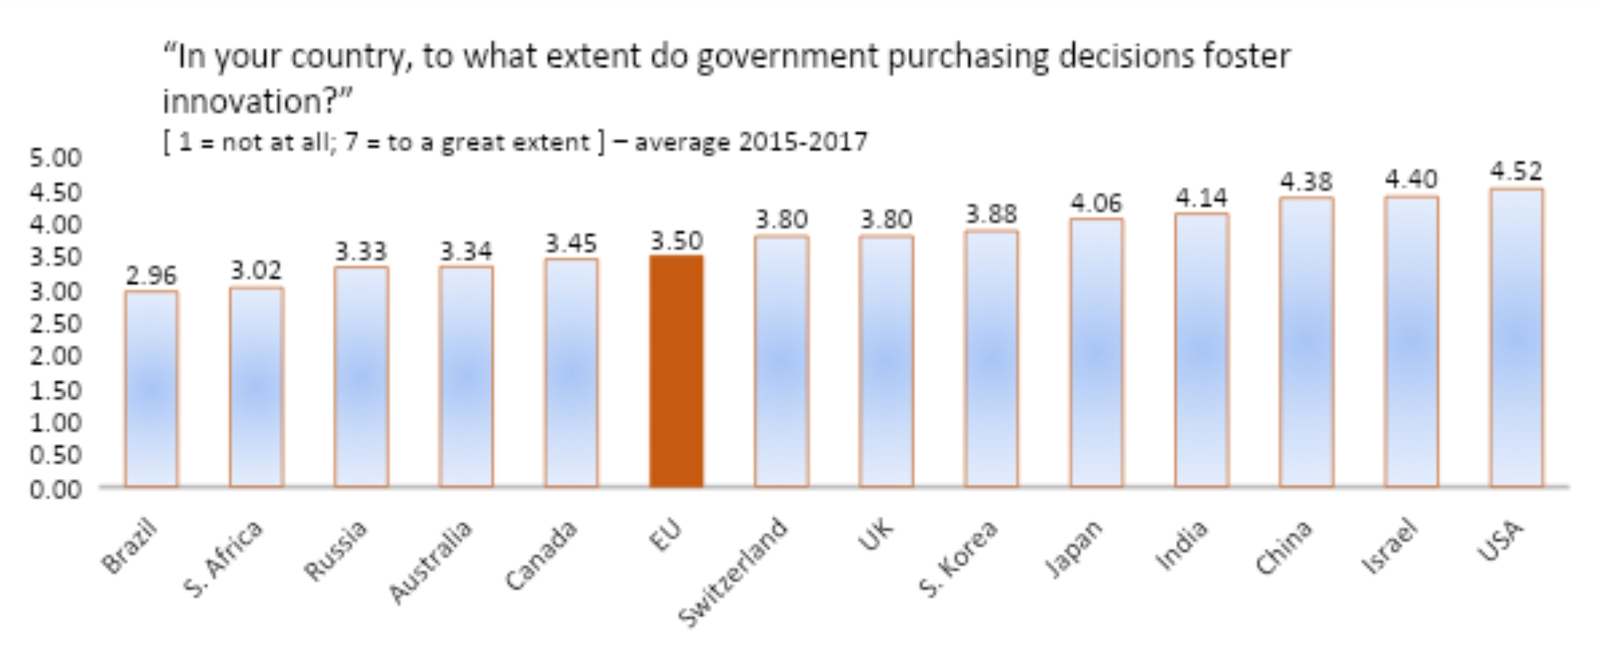 Graph 1: Business perception of government procurement of advanced technology products. Source: Source: own elaboration from World Economic Forum data [3]
